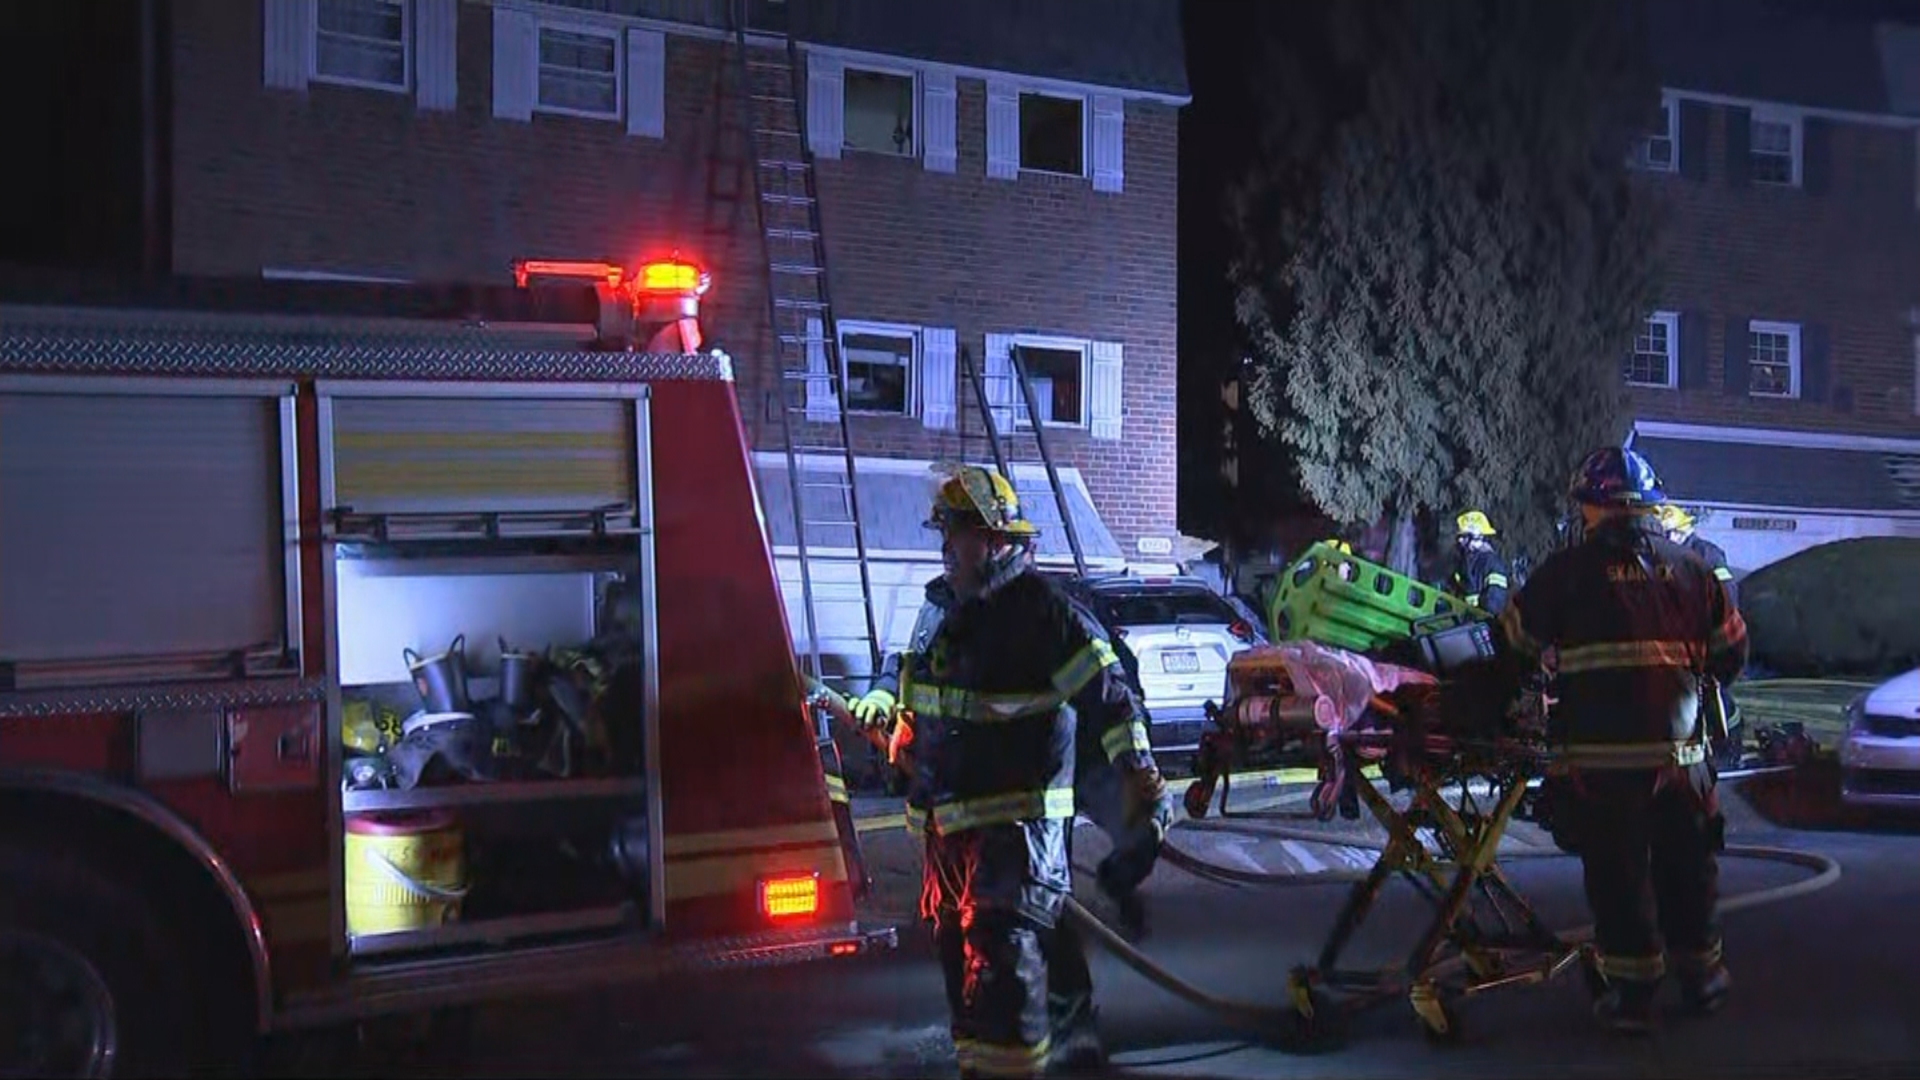 Fire In Philadelphia's Somerton Section Leaves 1 Person Injured, Officials Say